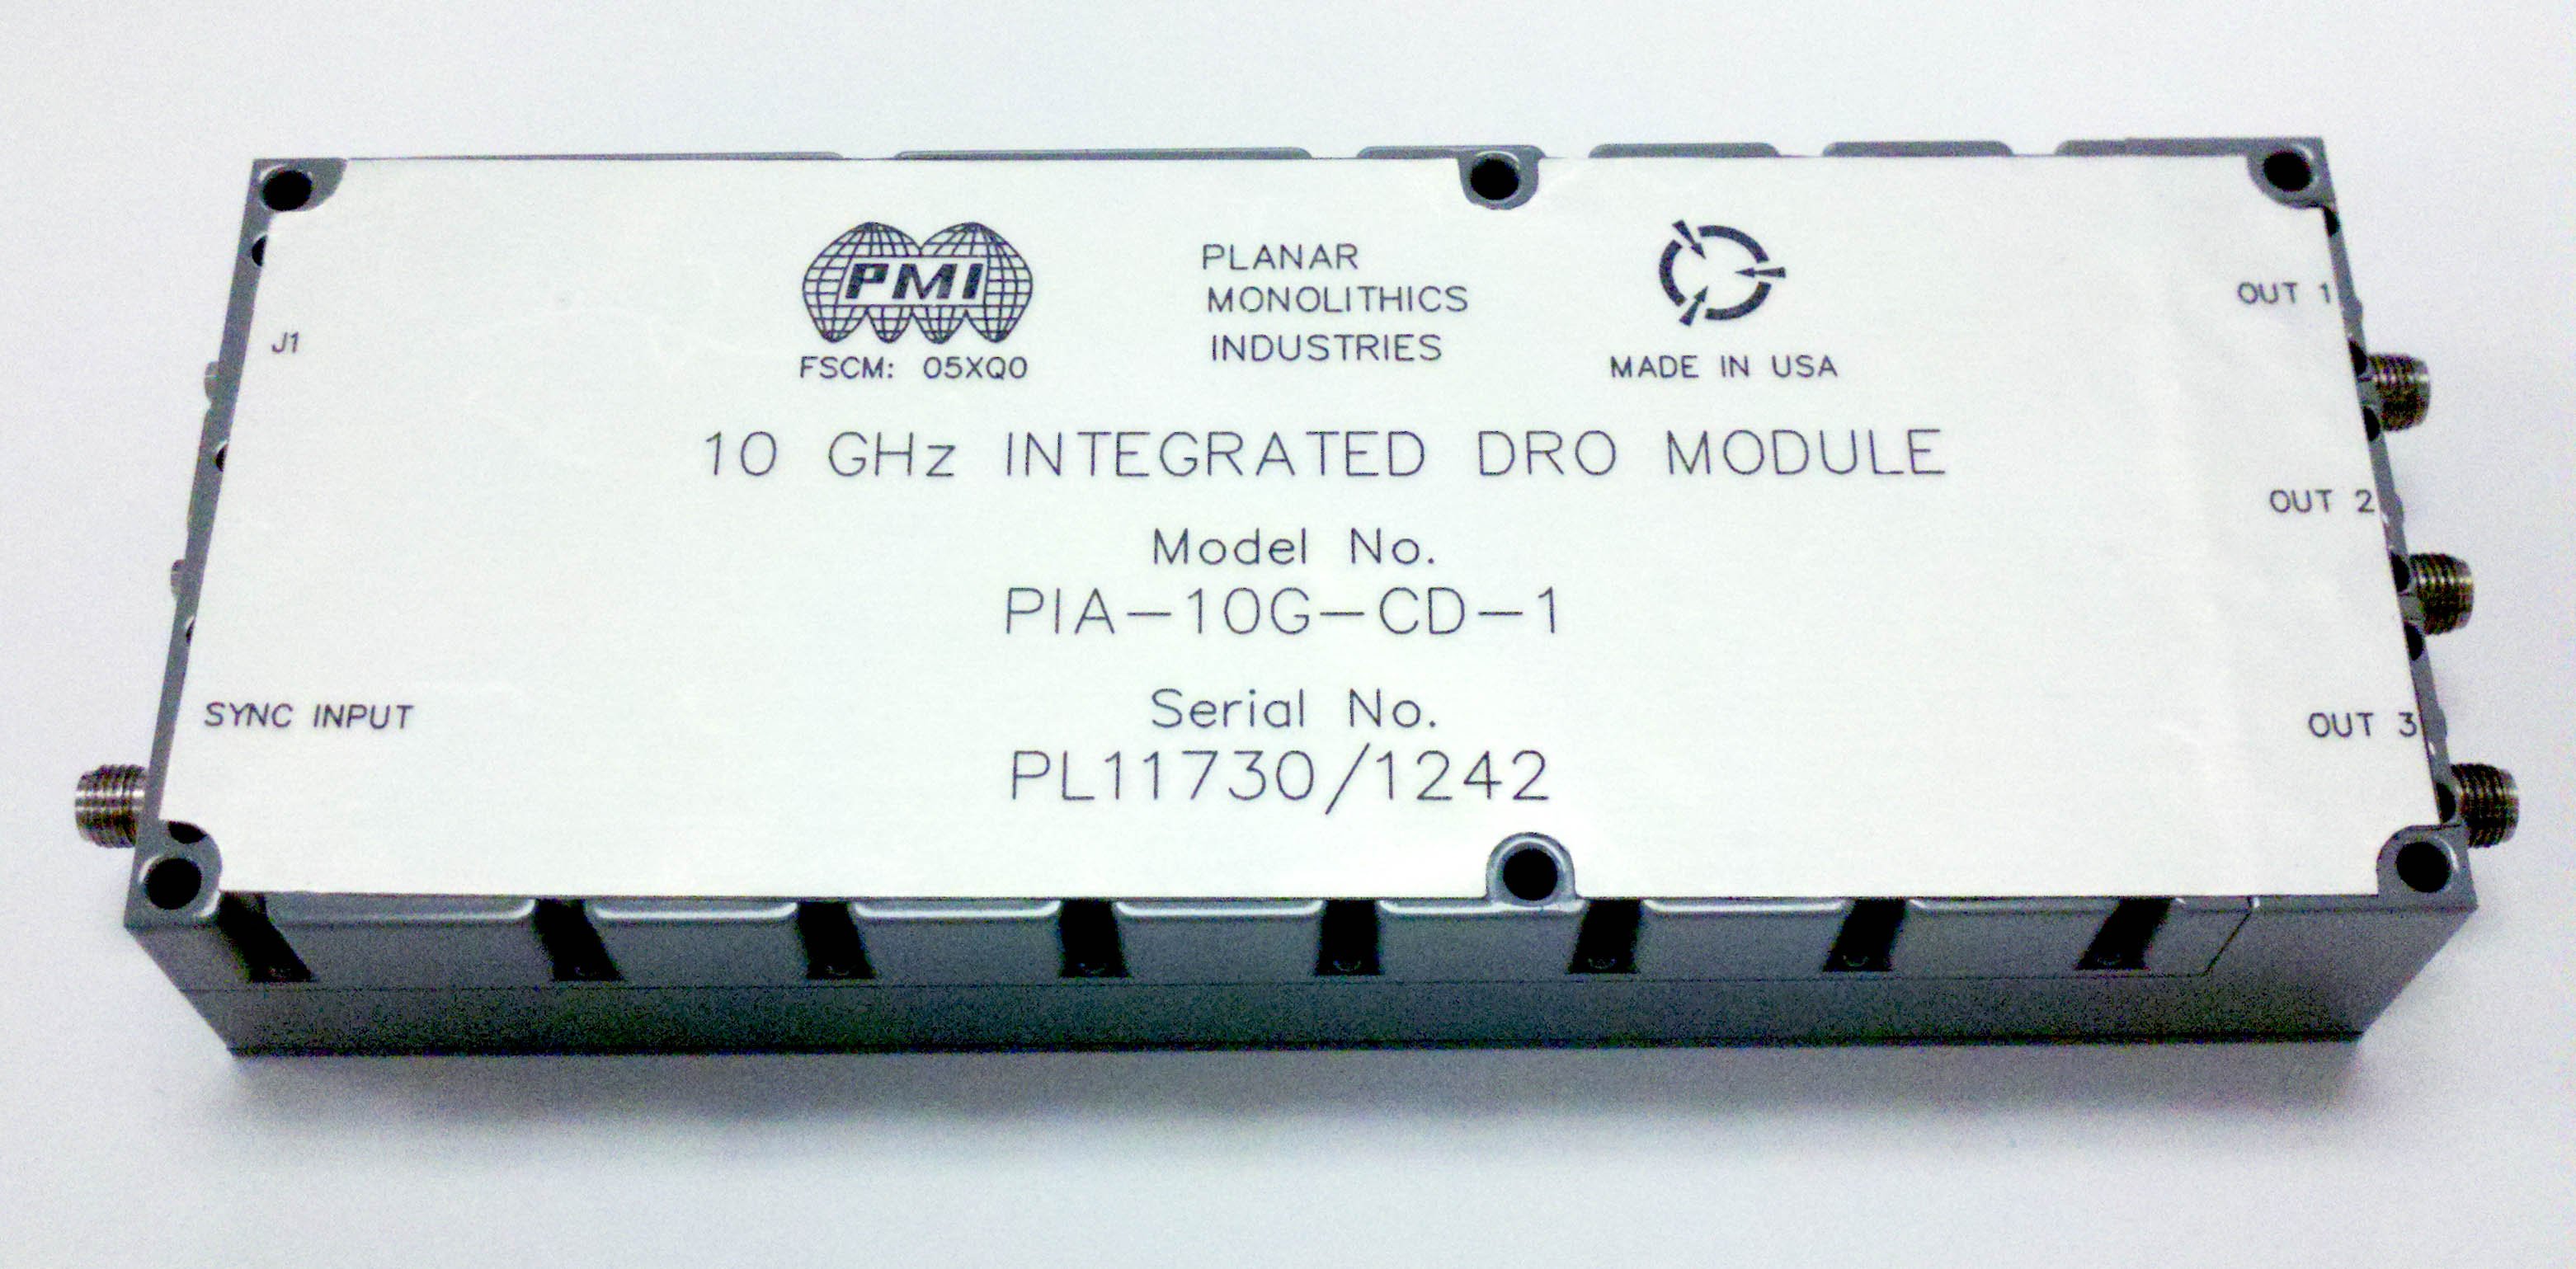 PIA-10G-CD-1 Integrated Dielectric Resonator (DRO)